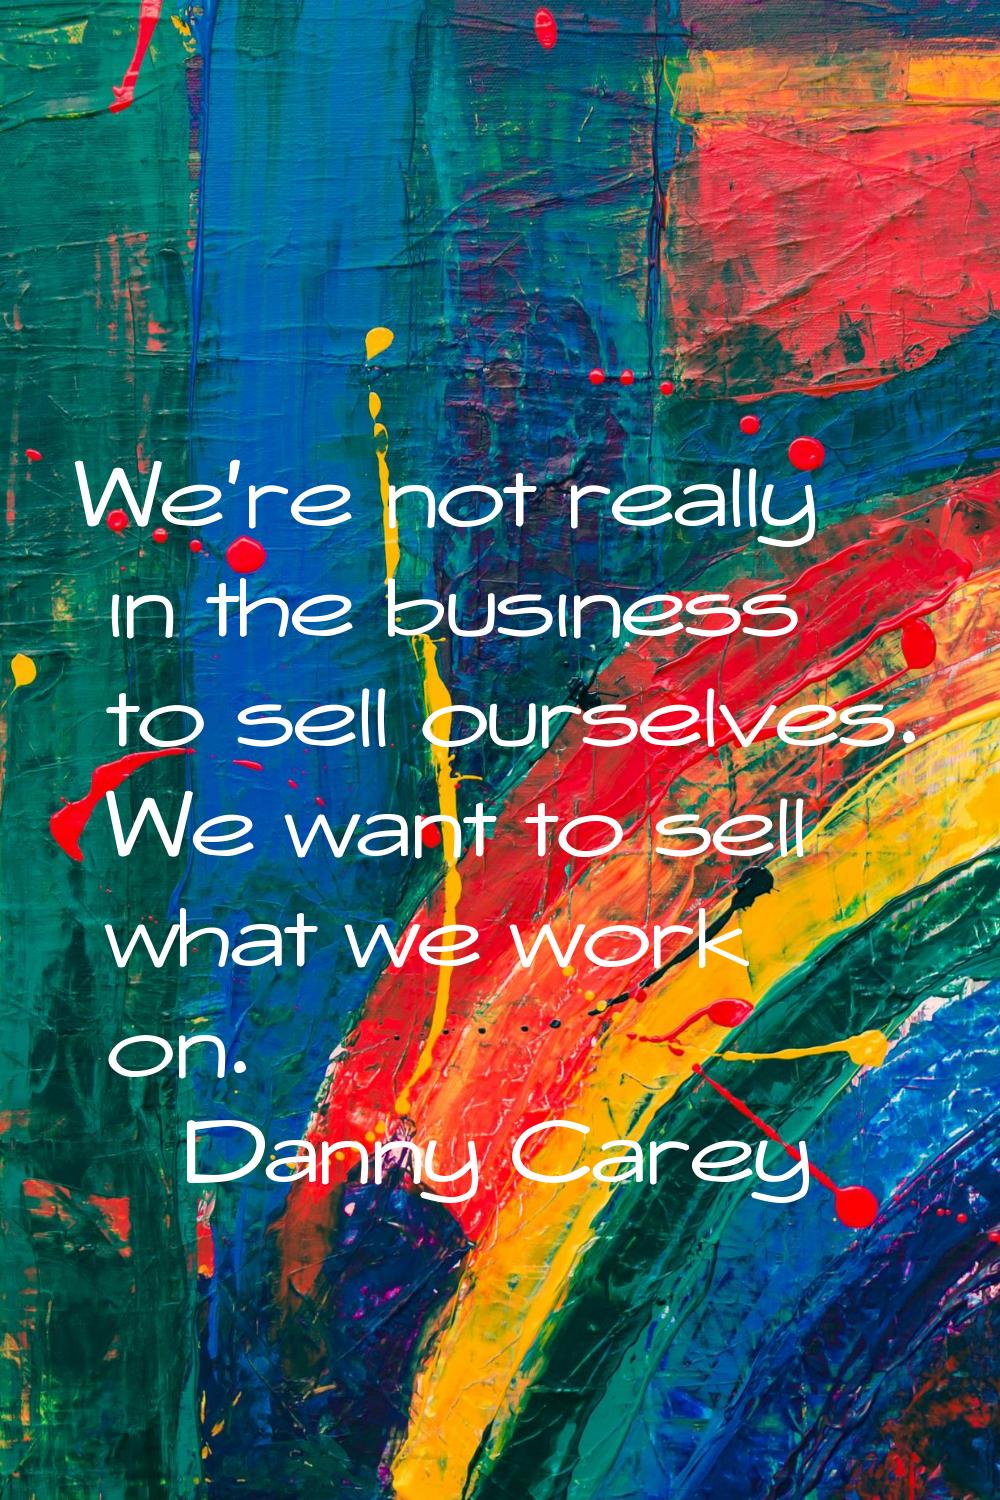 We're not really in the business to sell ourselves. We want to sell what we work on.